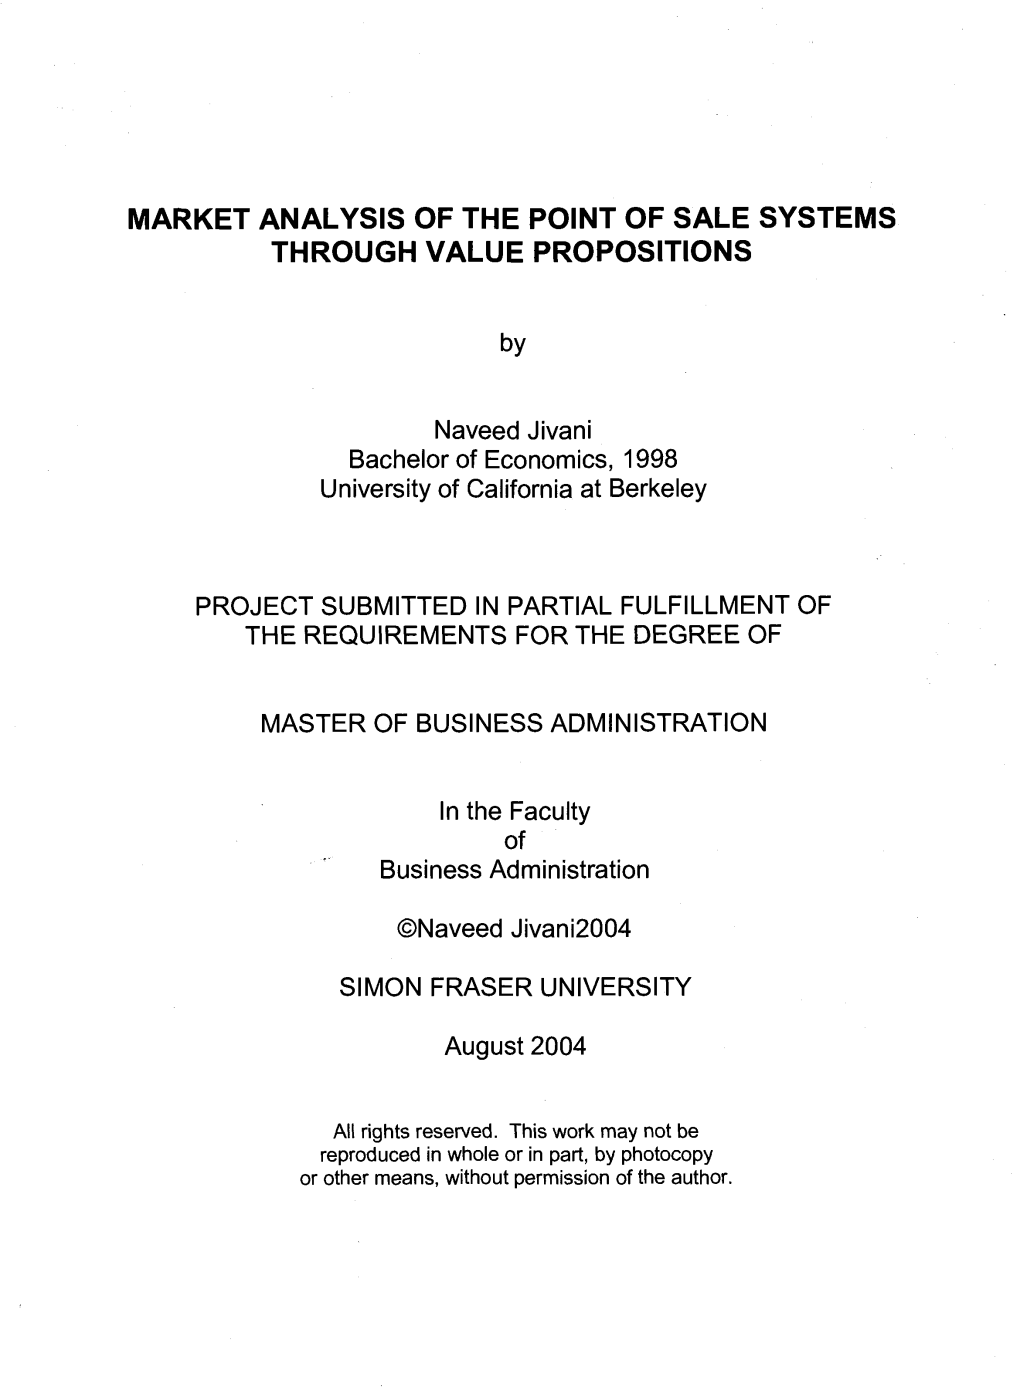 Market Analysis of the Point of Sale Systems Through Value Propositions